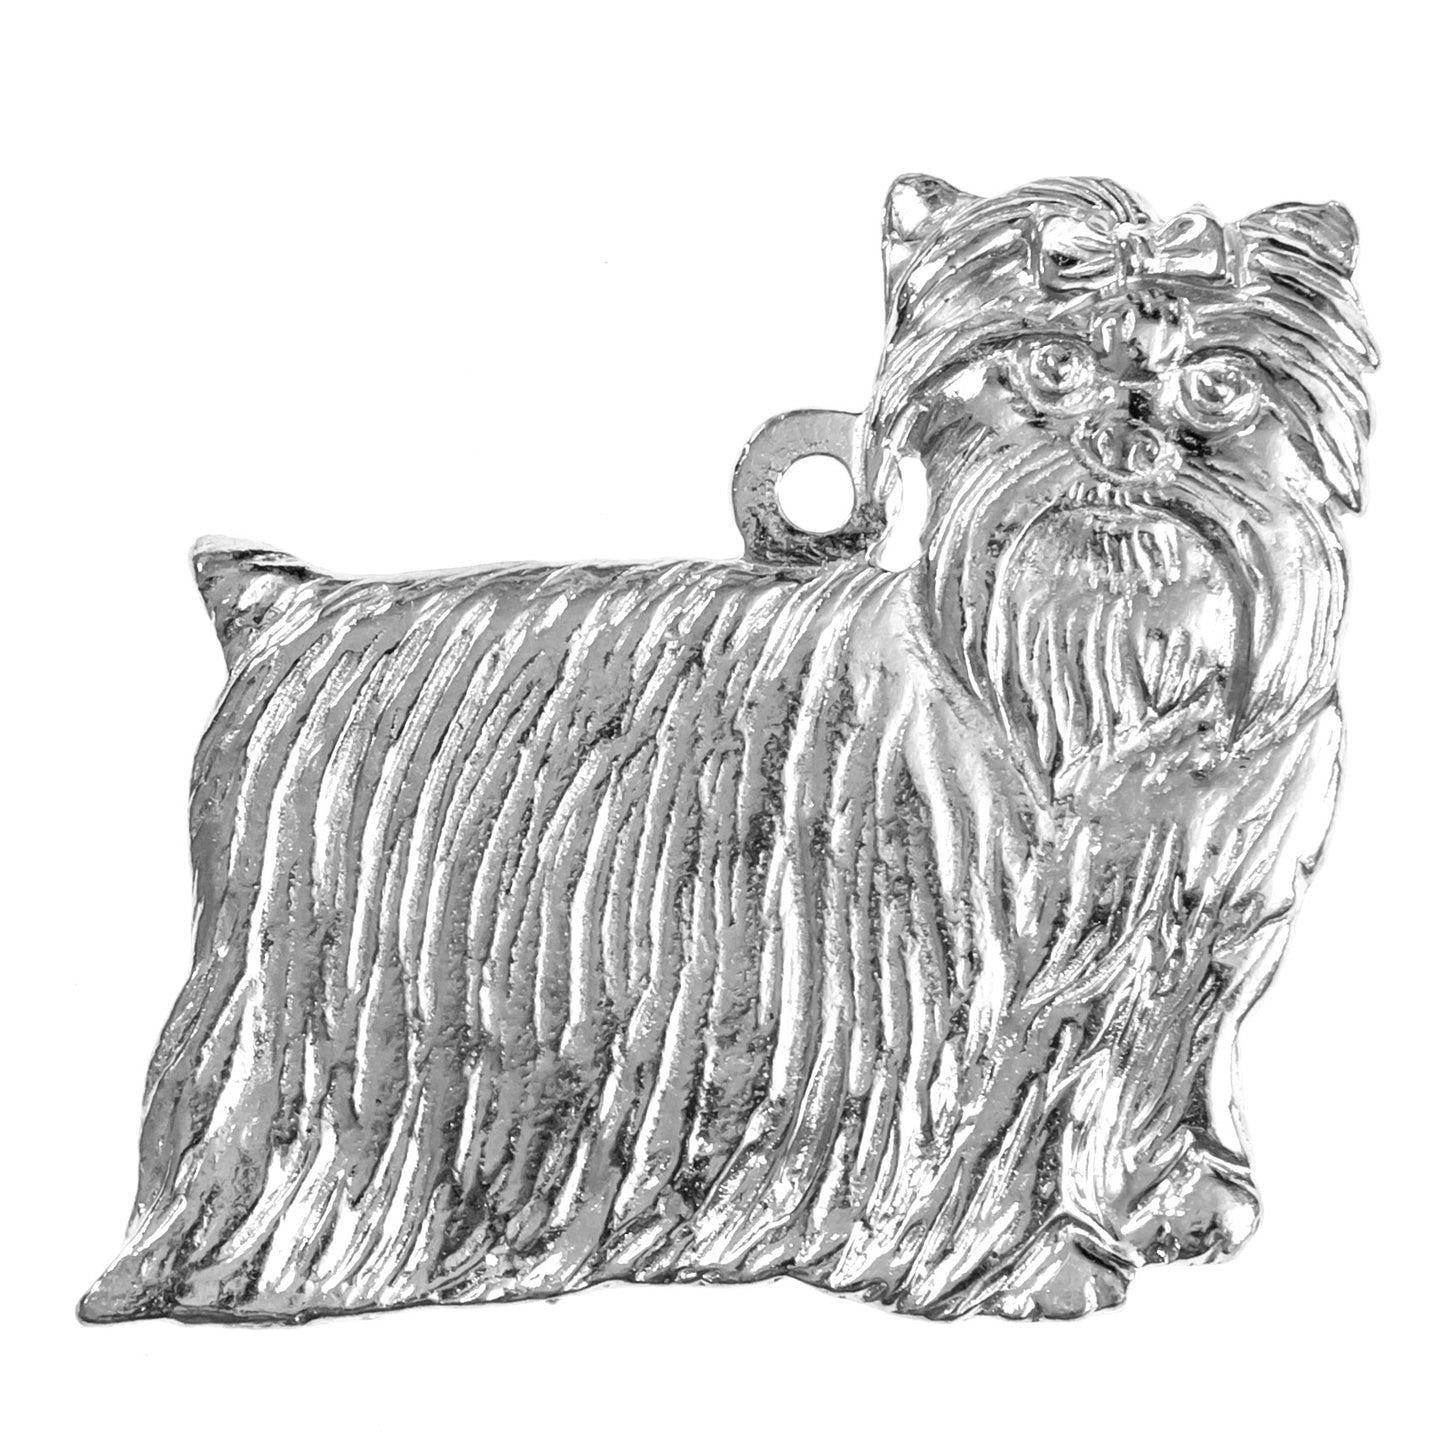 Silver Pewter Metal Yorkshire Terrier Ornament Top Gift Ideas - House of Morgan Pewter